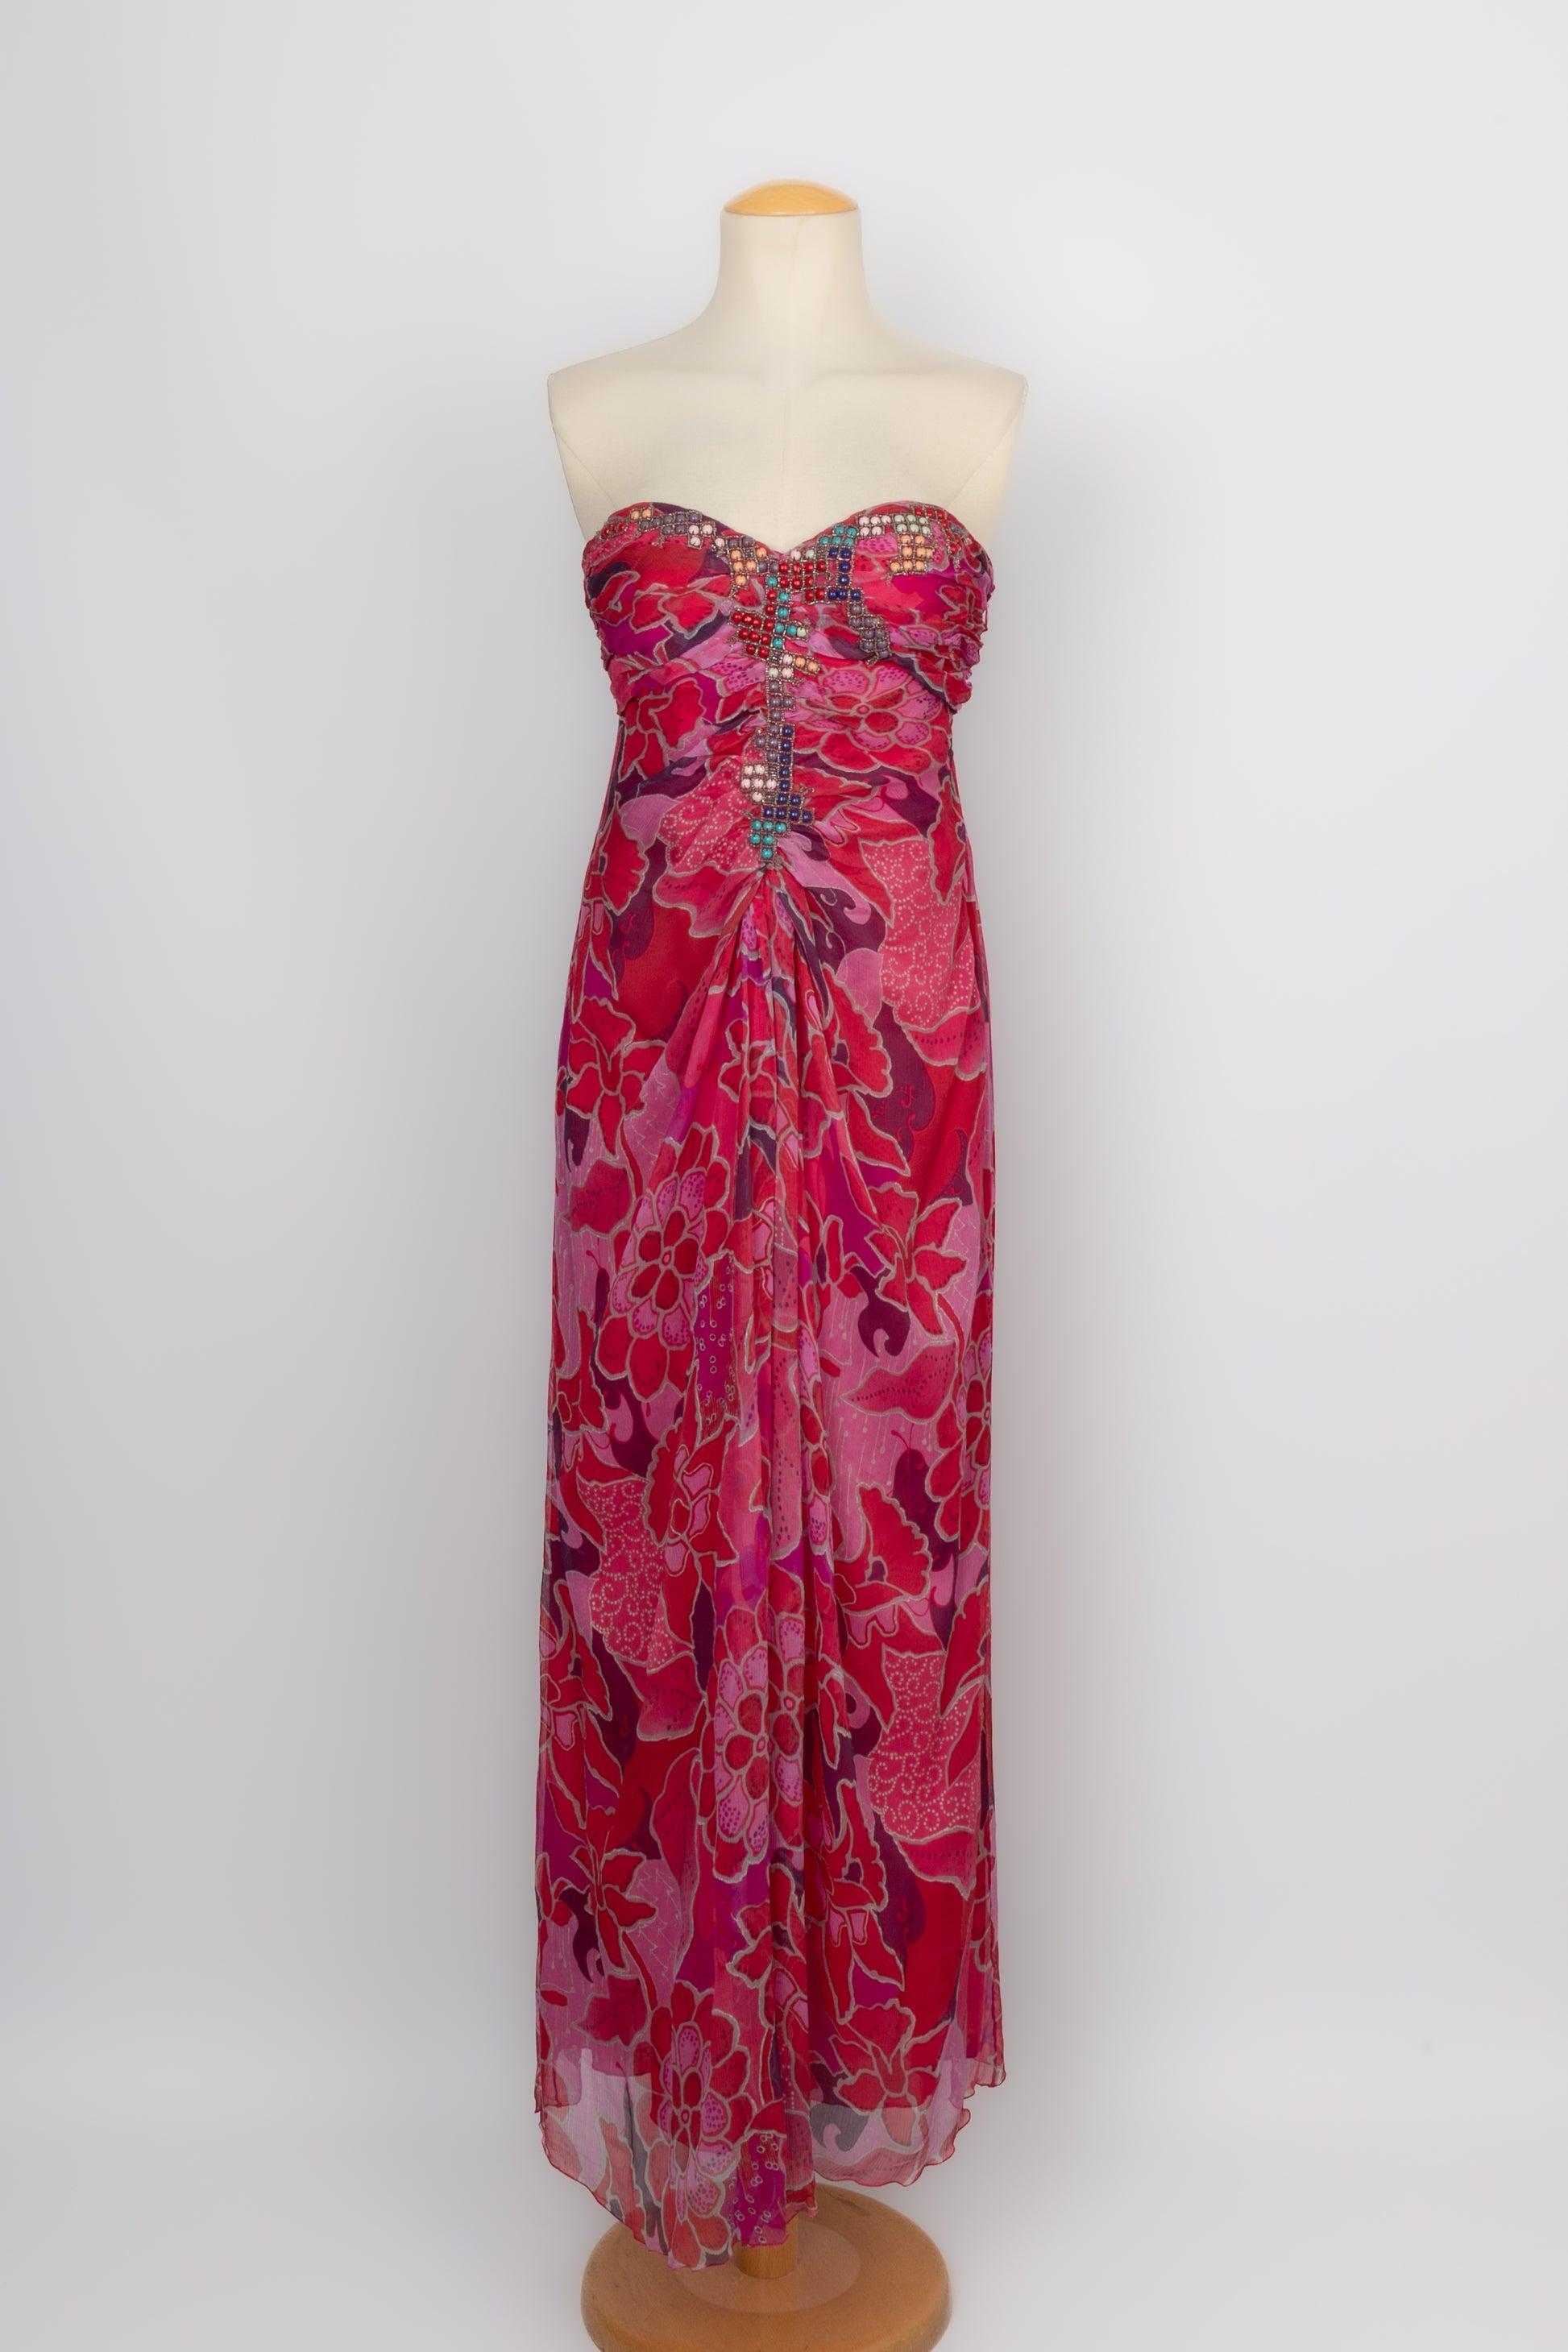 Ungaro - Pleated silk bustier dress in pink tones. It was designed with the flounced stole. No size nor composition label, it fits a 38FR. To be mentioned, a few stains on the stole.

Additional information:
Condition: Good condition
Dimensions: